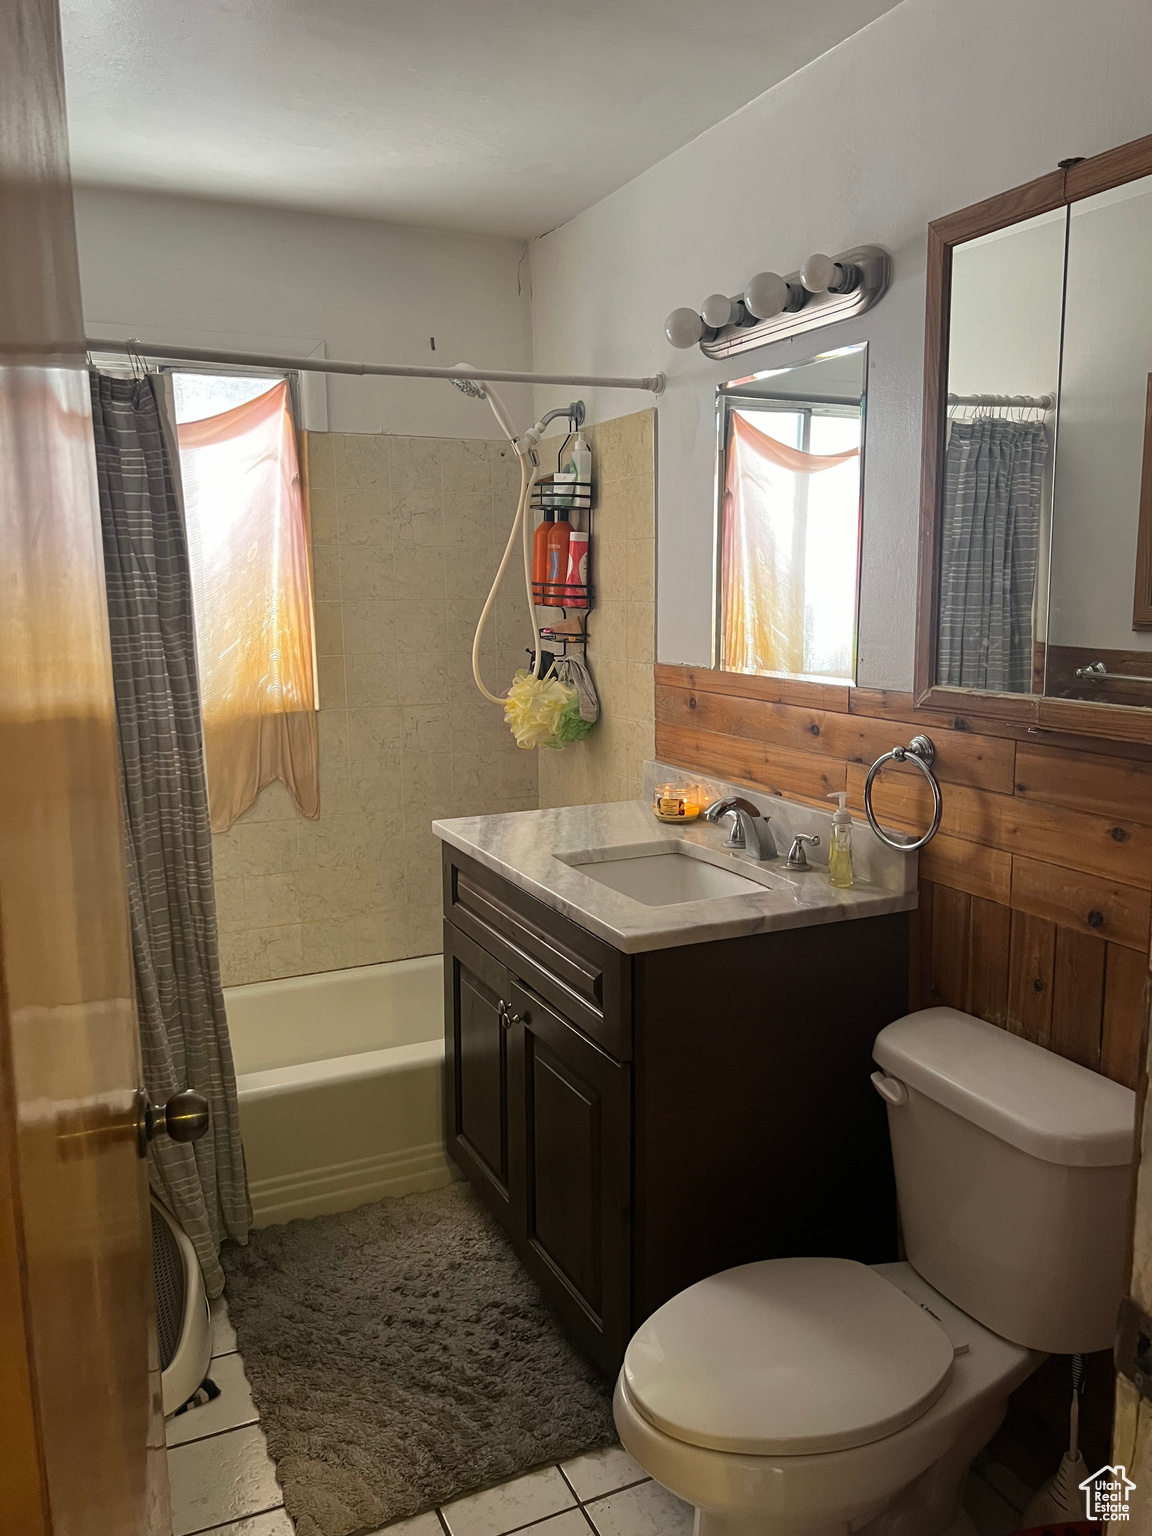 Full bathroom featuring tile floors, large vanity, toilet, and shower / tub combo with curtain